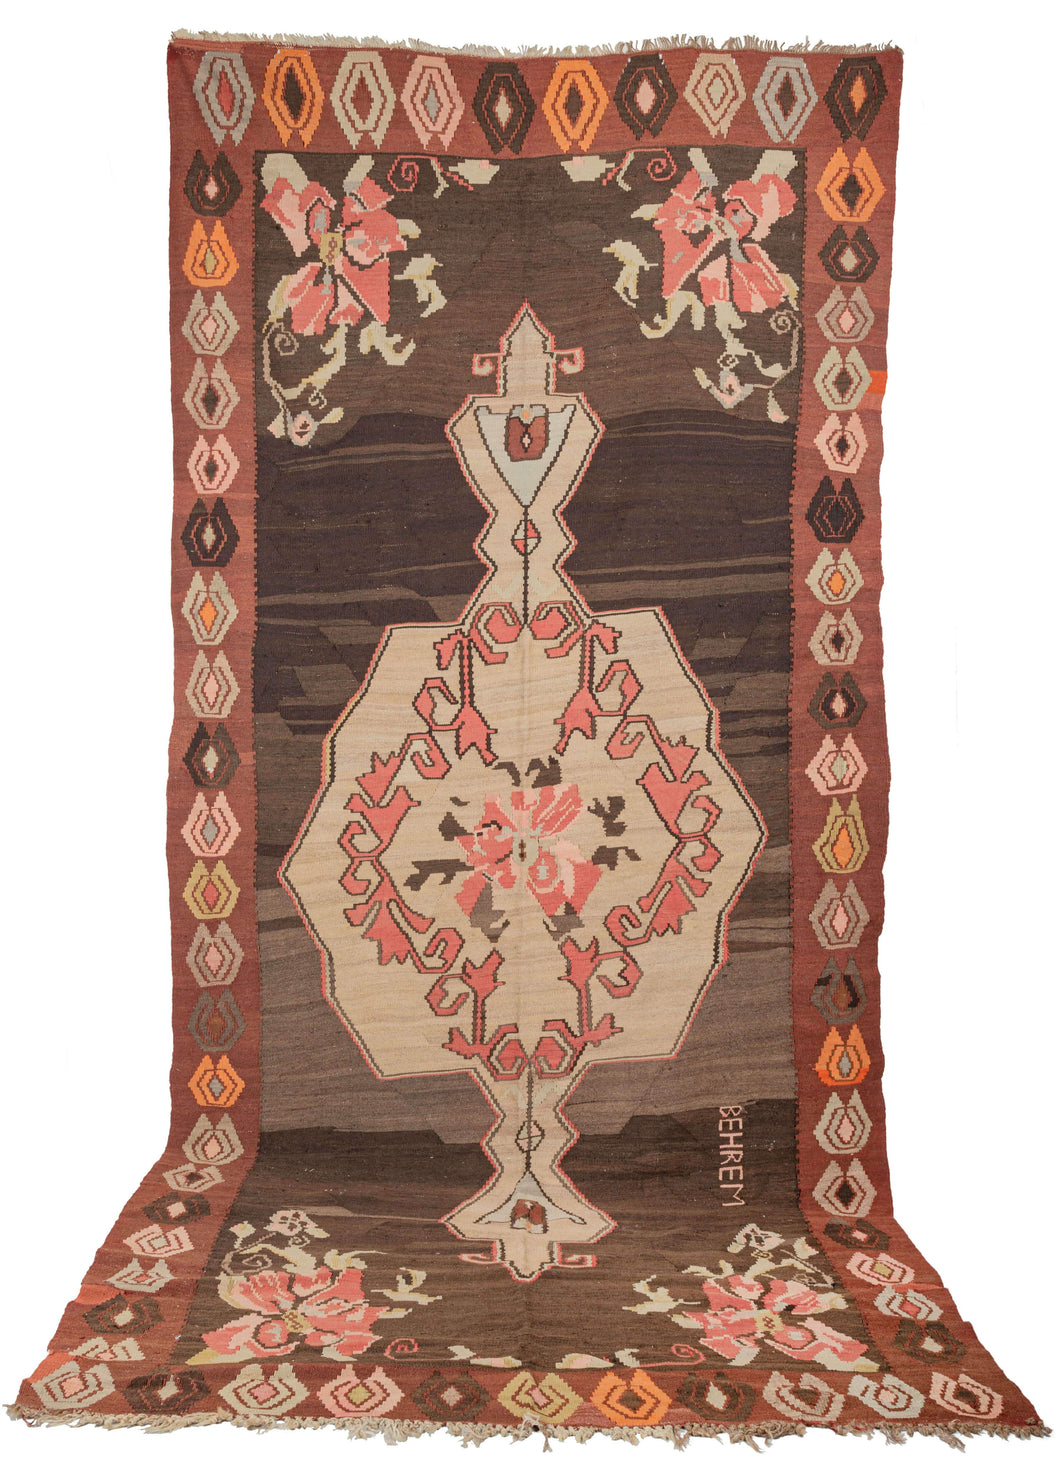 Turkish Kars Kilim featuring a scalloped central medallion with a dainty floral center surrounded by pink scrolls on camel ground. The same delicate flower featured in the medallion appears in each cornice. The field features a lovely brown which undulates wildly from light to dark brown which gives a subtle but pulsating energy. The word 